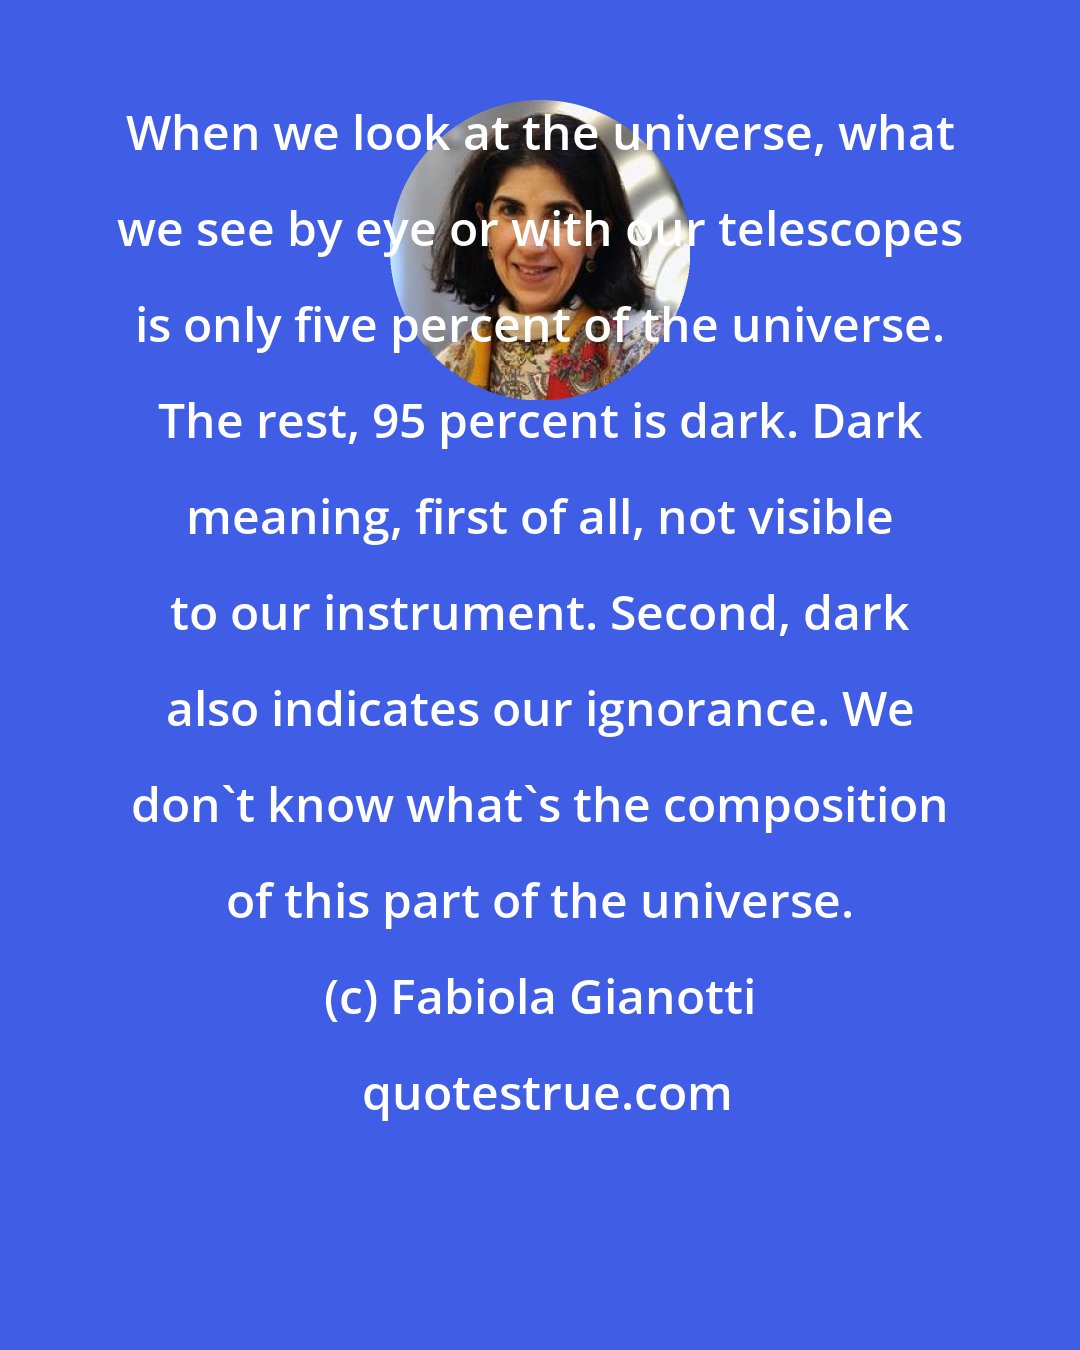 Fabiola Gianotti: When we look at the universe, what we see by eye or with our telescopes is only five percent of the universe. The rest, 95 percent is dark. Dark meaning, first of all, not visible to our instrument. Second, dark also indicates our ignorance. We don't know what's the composition of this part of the universe.